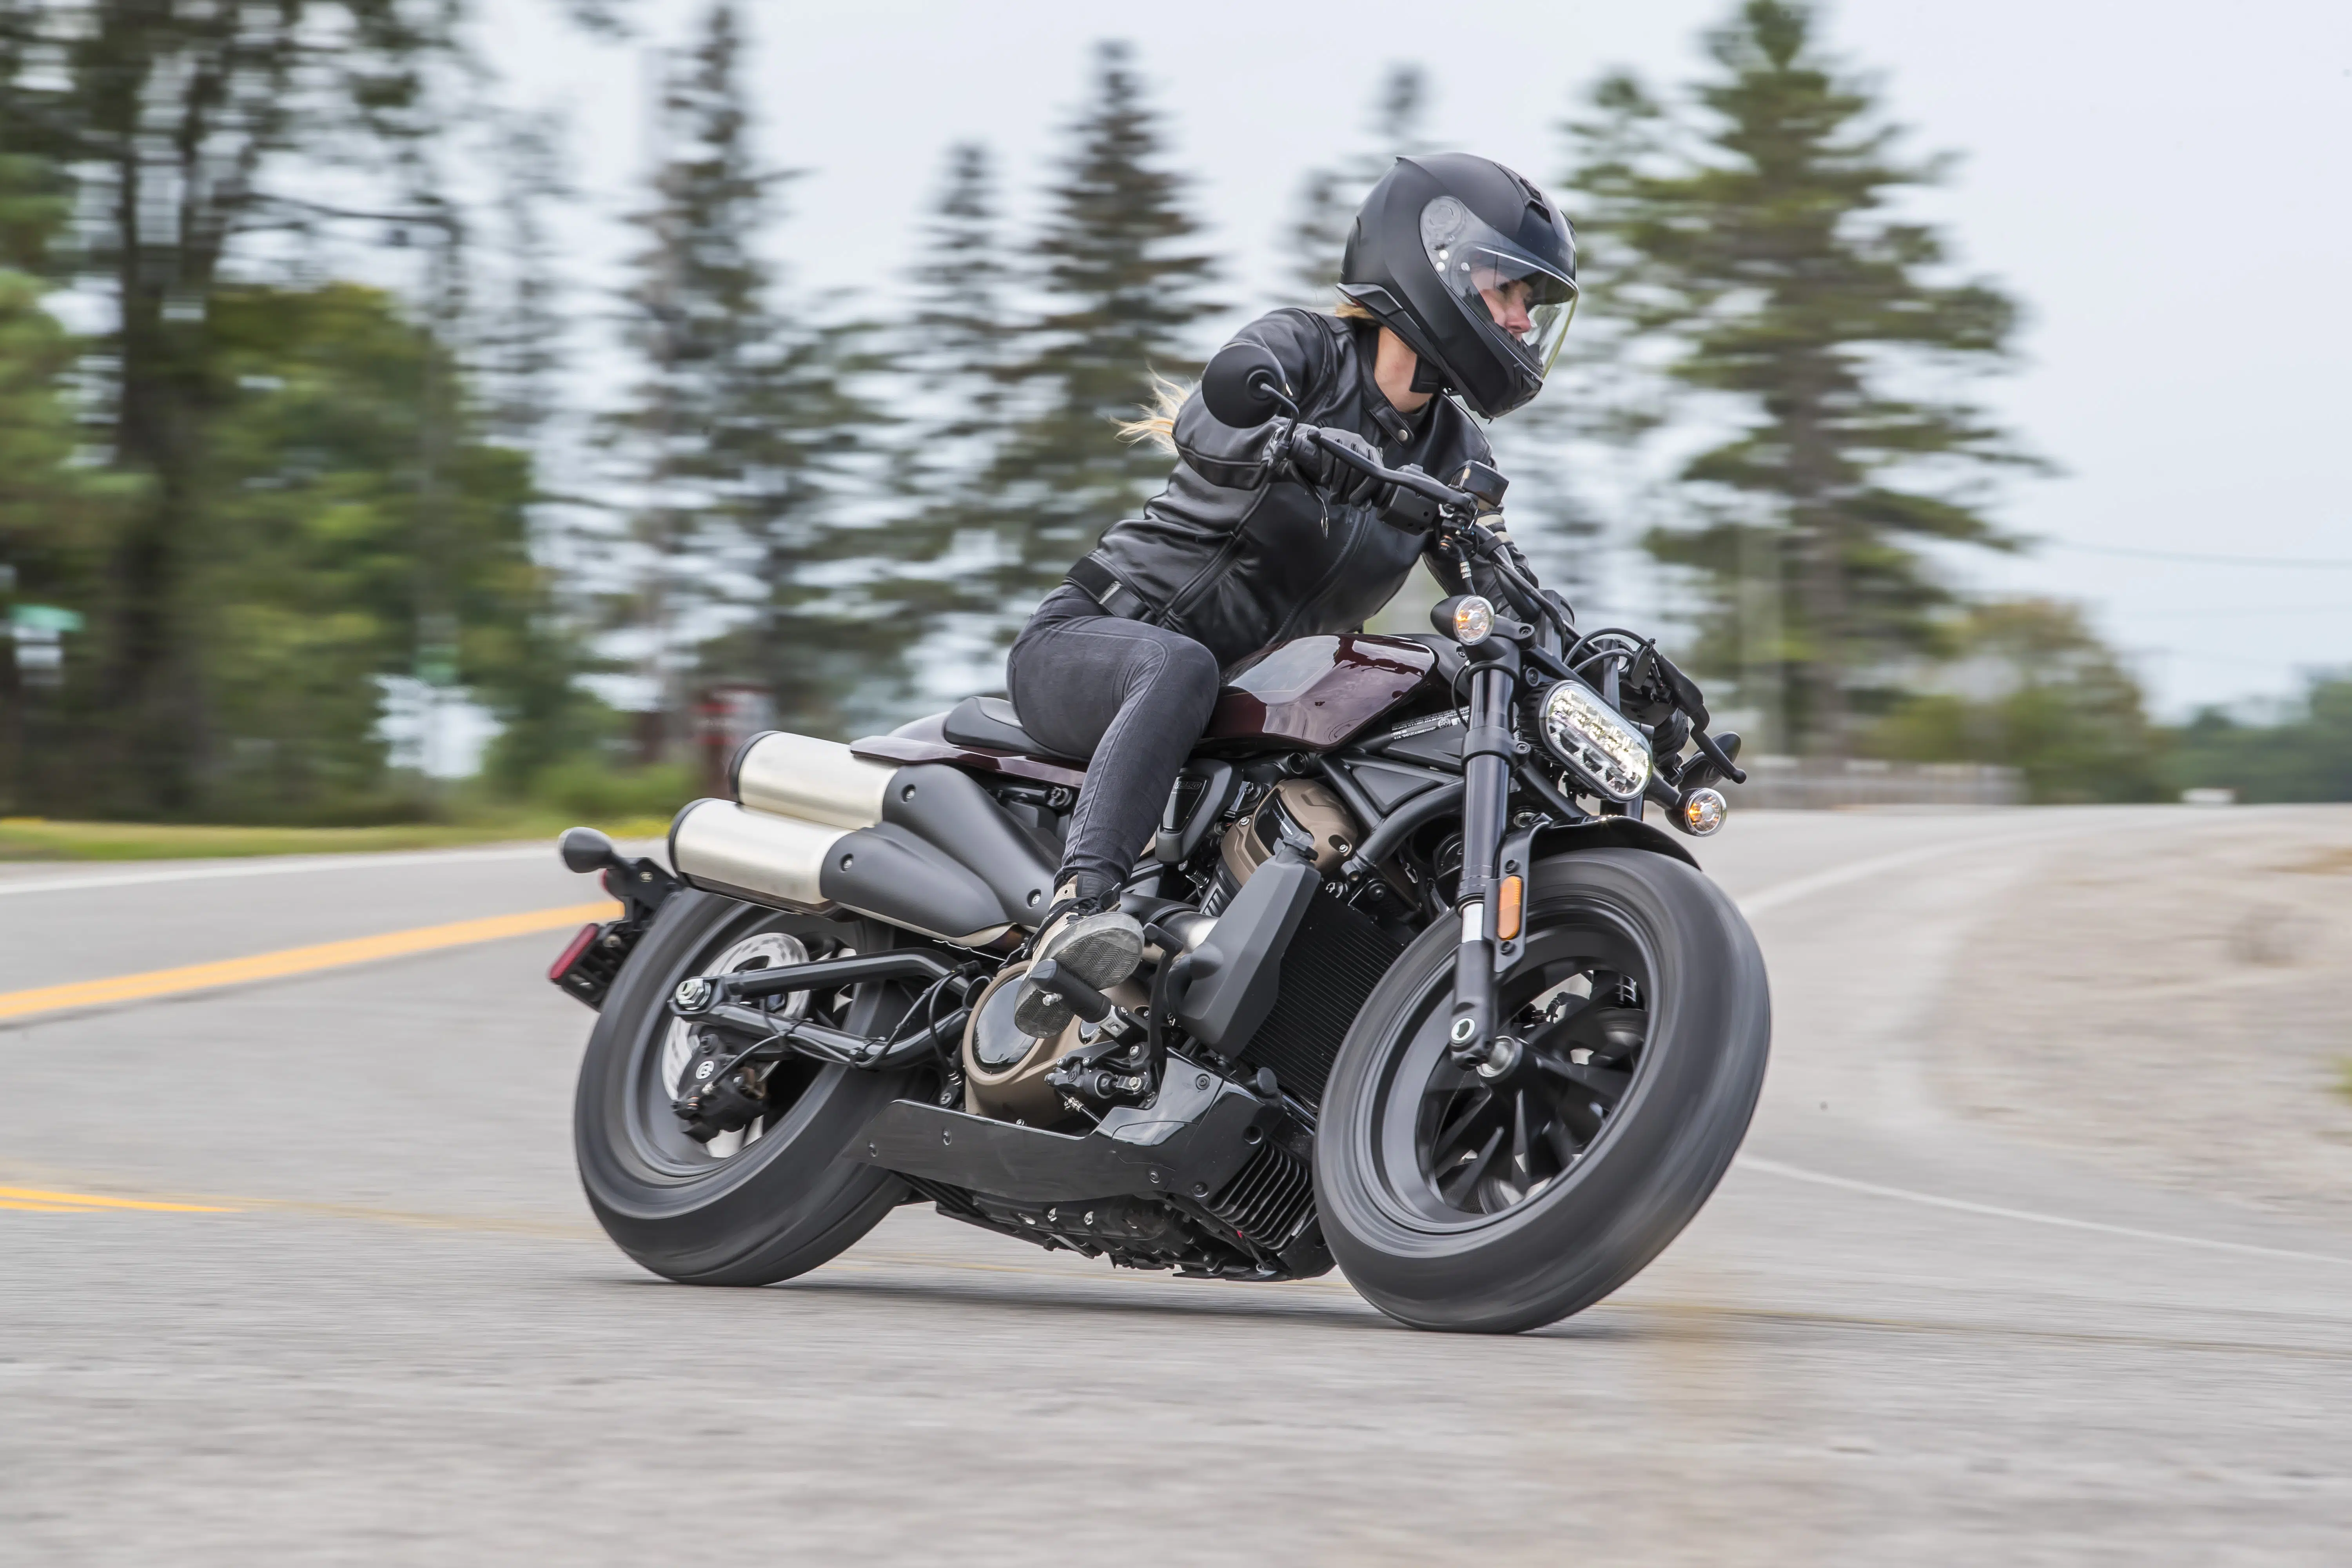 The Sportster S definitely has a badass look to turn heads.